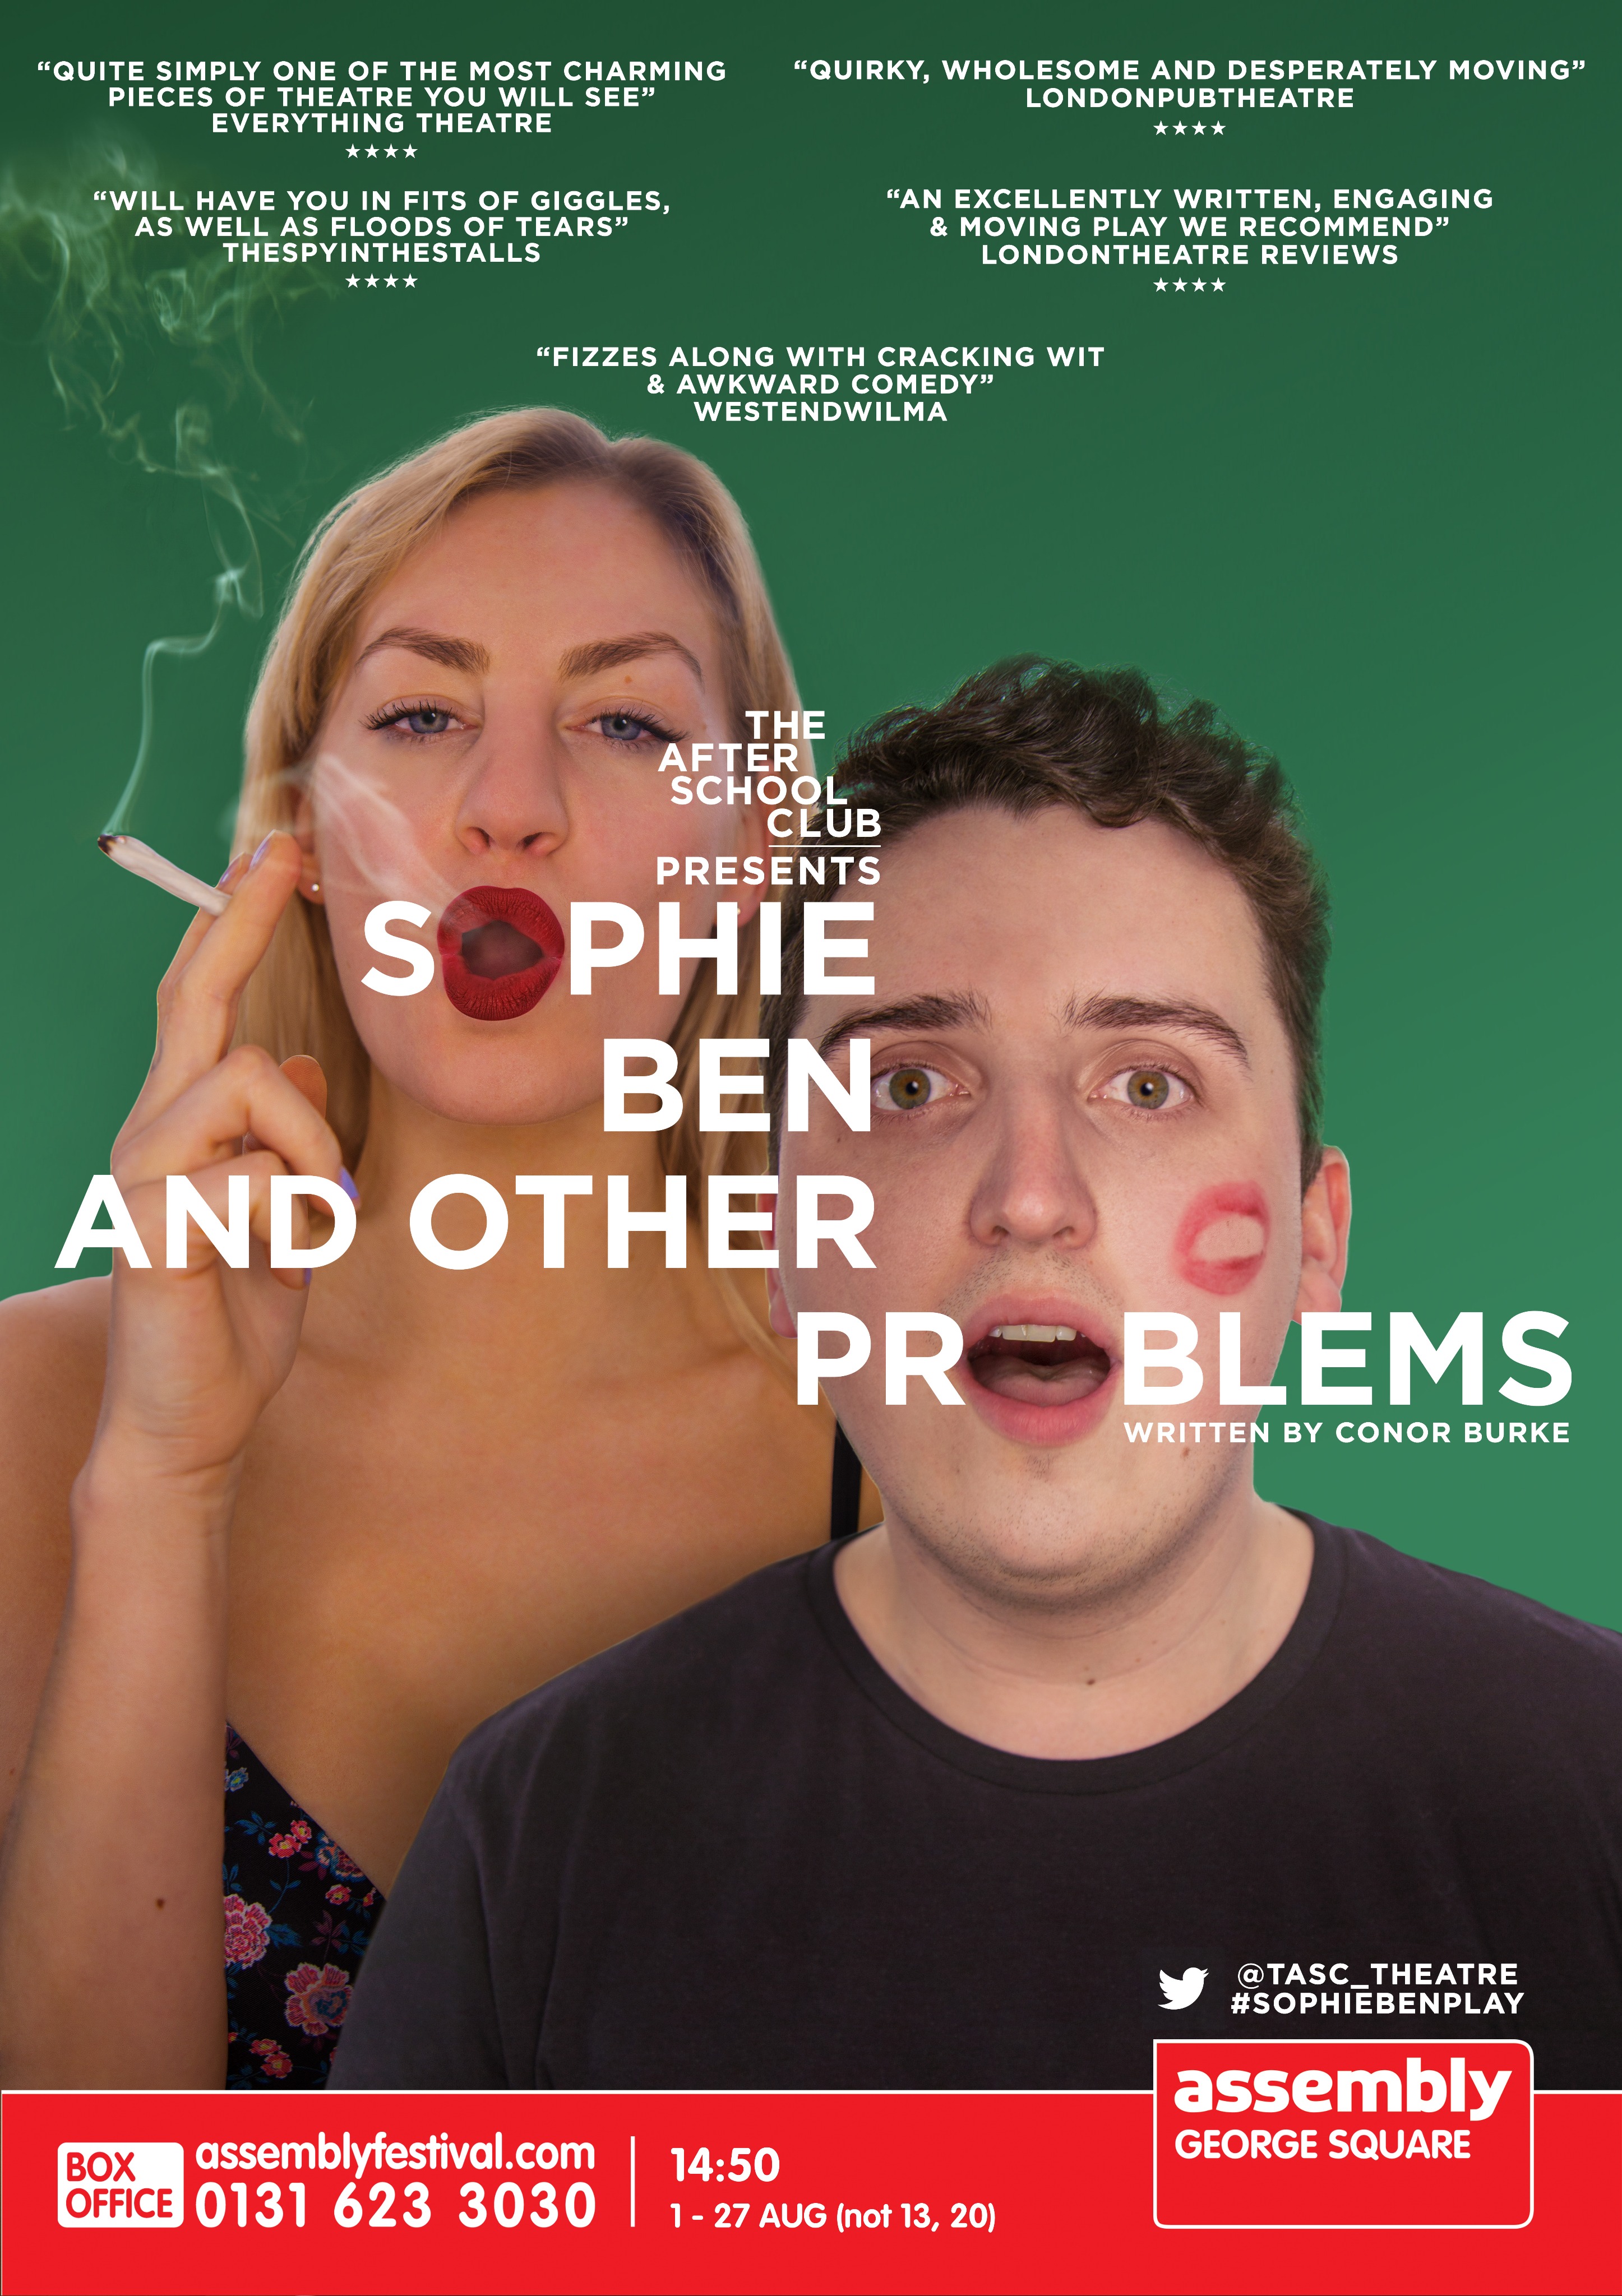 The poster for Sophie, Ben and Other Problems